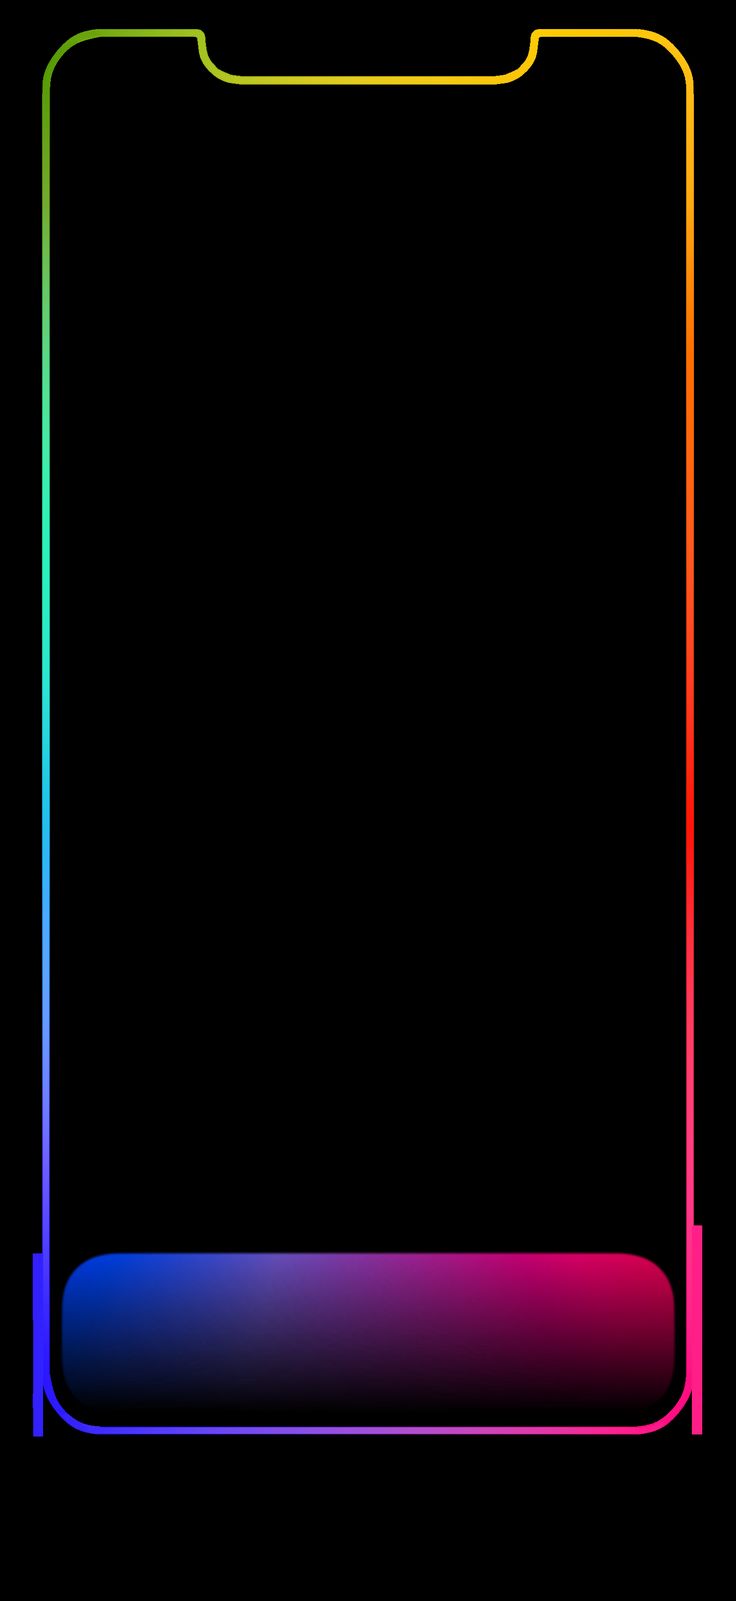 iPhone XS Max Outline wallpaper